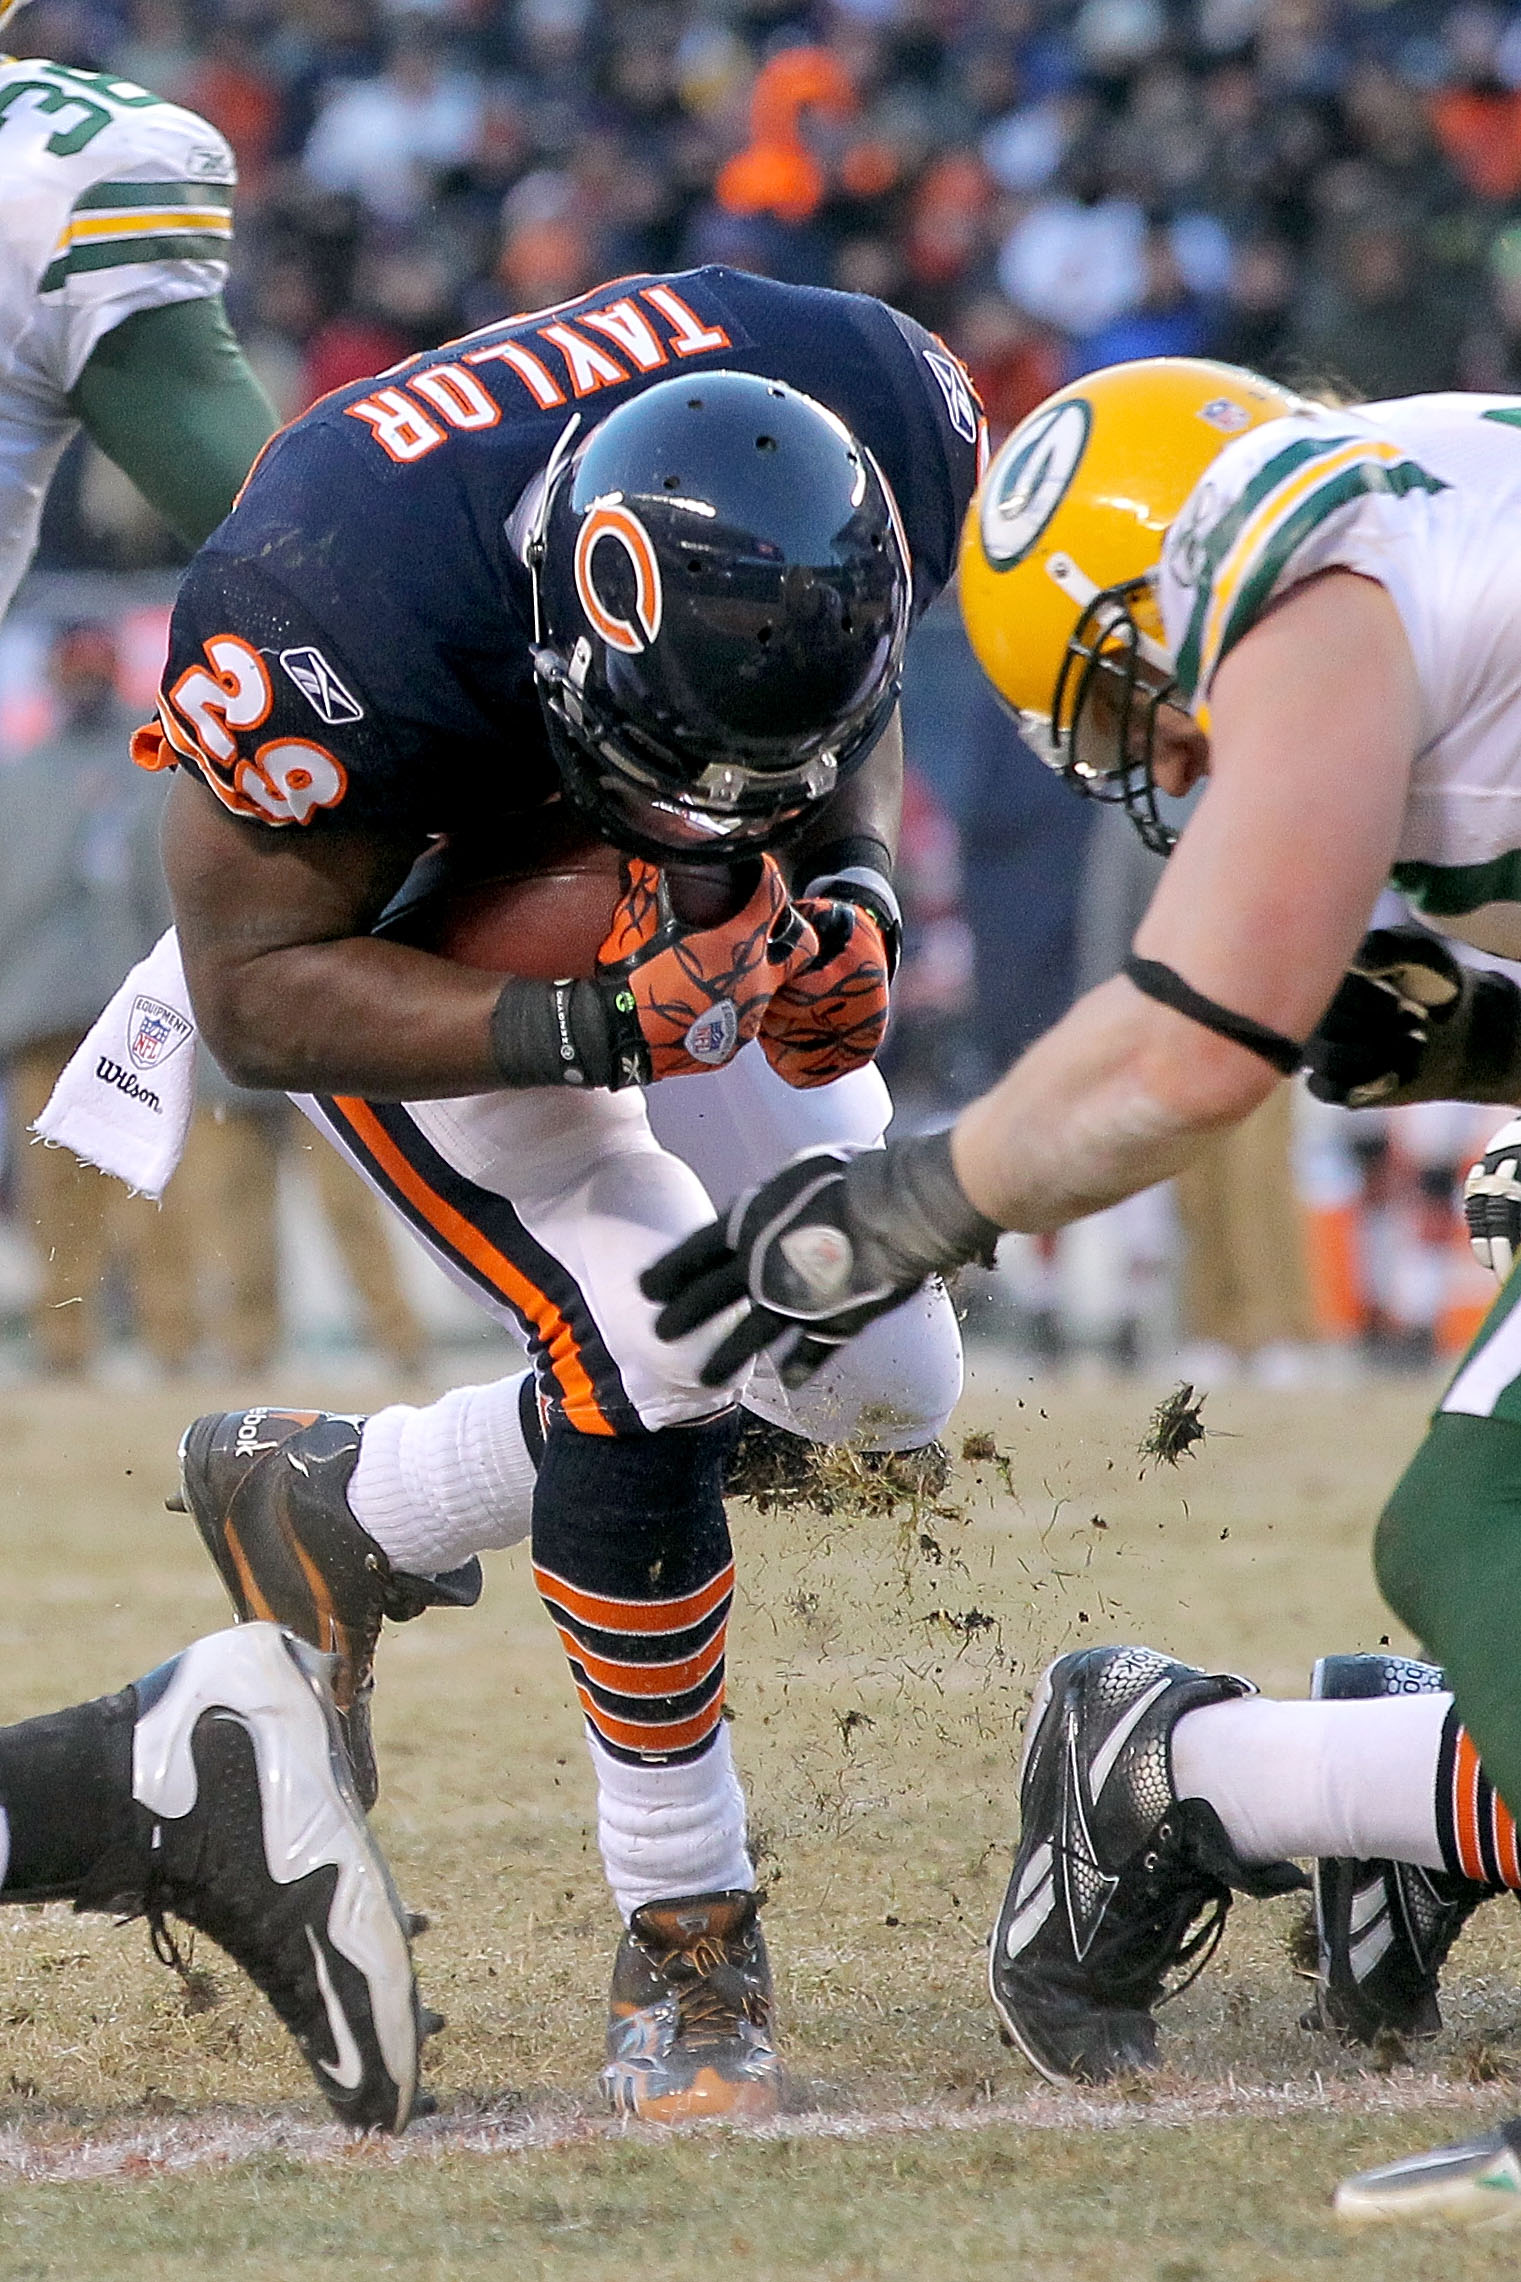 CHICAGO, IL - JANUARY 23:  Running back Chester Taylor #29 of the Chicago Bears scores a one-yard fourth quarter touchdown against the Green Bay Packers in the NFC Championship Game at Soldier Field on January 23, 2011 in Chicago, Illinois.  (Photo by Dou